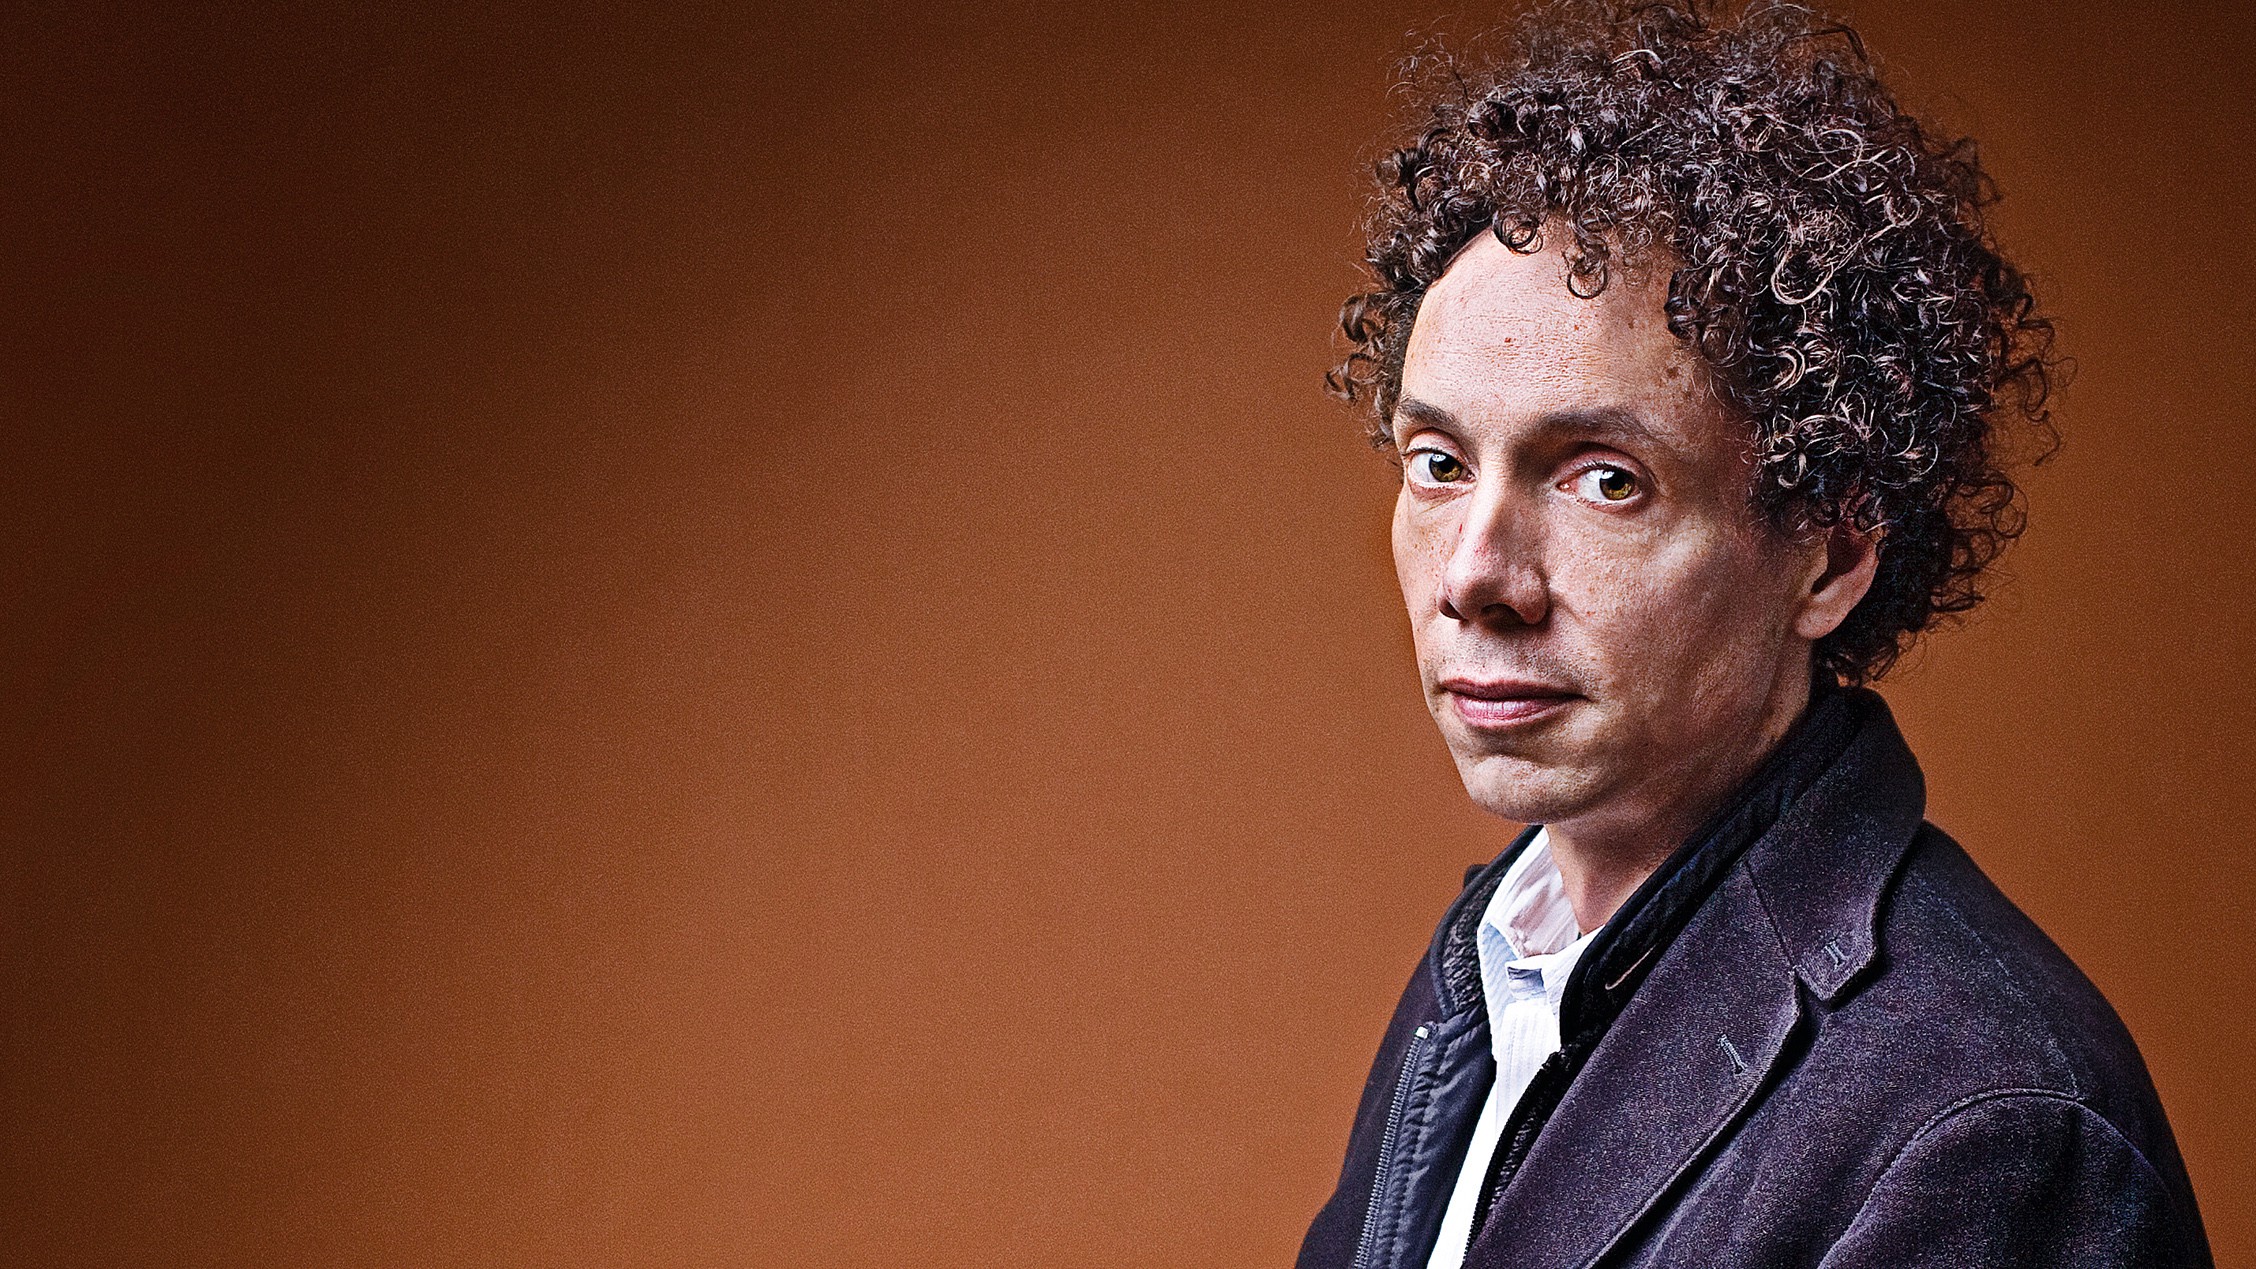 Malcom Gladwell on his Experience of Therapy